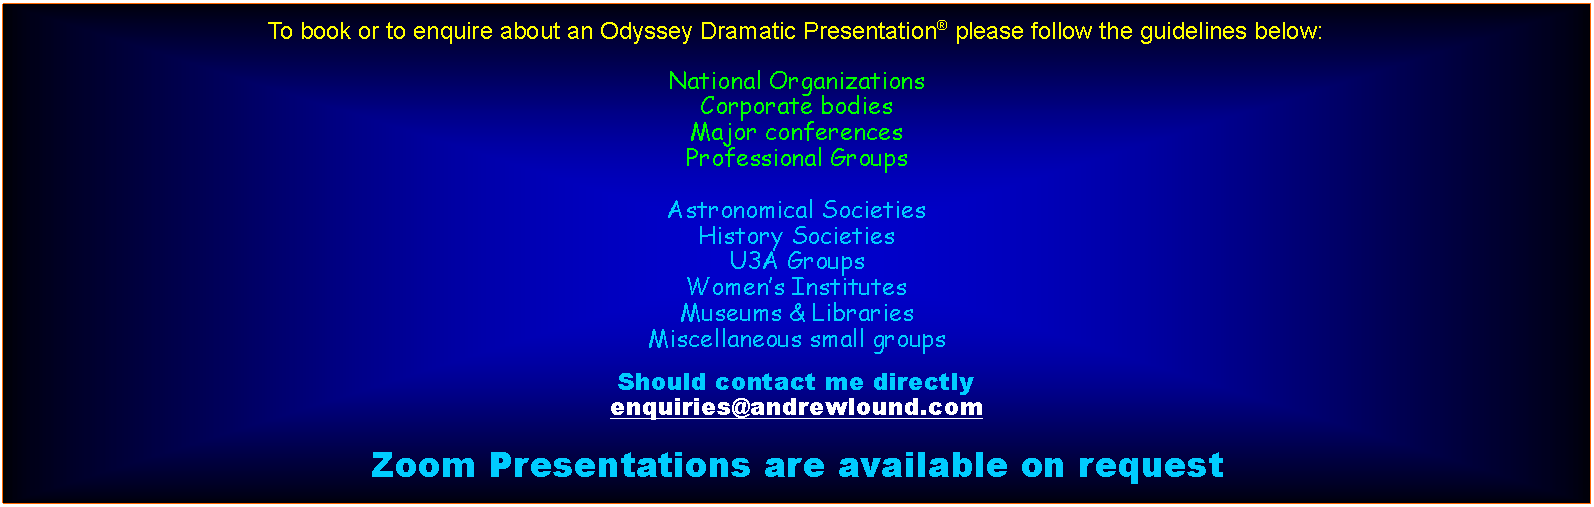 Text Box: To book or to enquire about an Odyssey Dramatic Presentation please follow the guidelines below:National OrganizationsCorporate bodiesMajor conferencesProfessional GroupsAstronomical SocietiesHistory SocietiesU3A GroupsWomens InstitutesMuseums & LibrariesMiscellaneous small groupsShould contact me directlyenquiries@andrewlound.comZoom Presentations are available on request